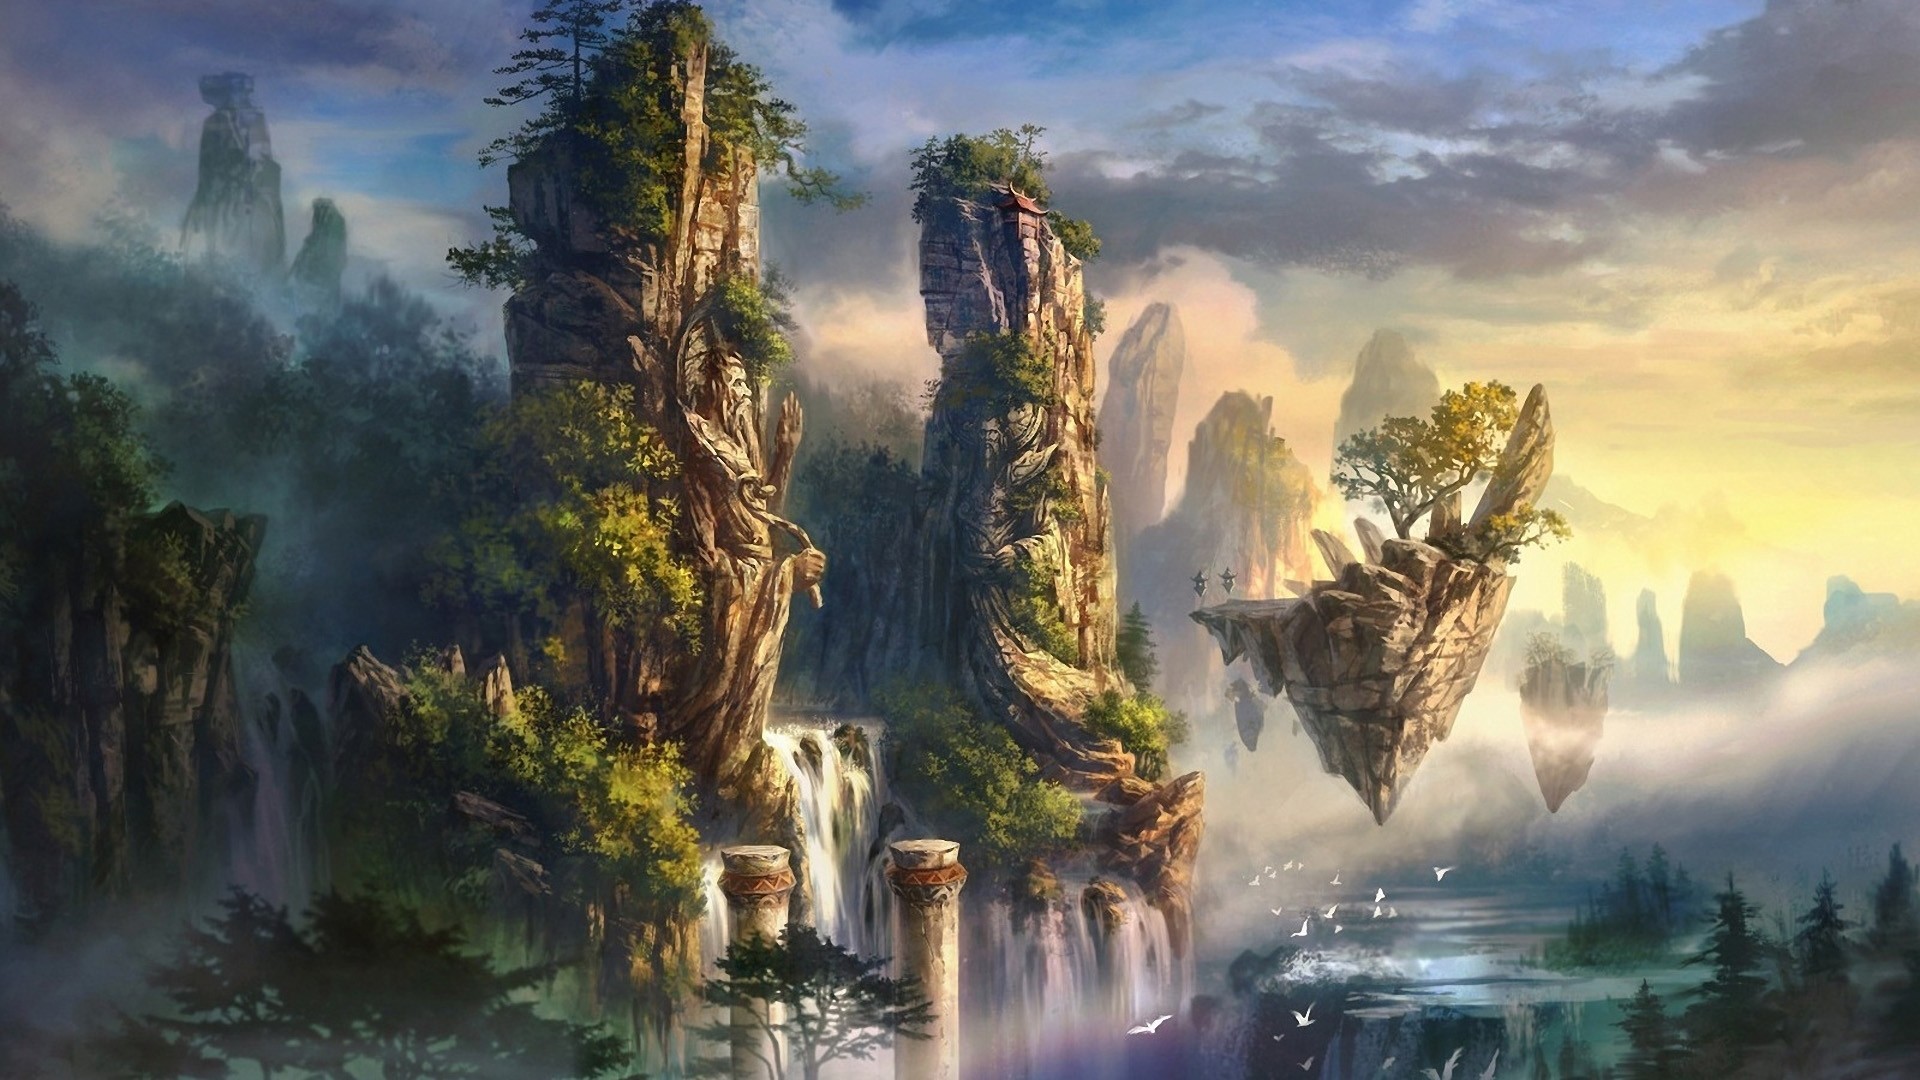 Fantasy Art wallpaper ·① Download free amazing HD wallpapers for